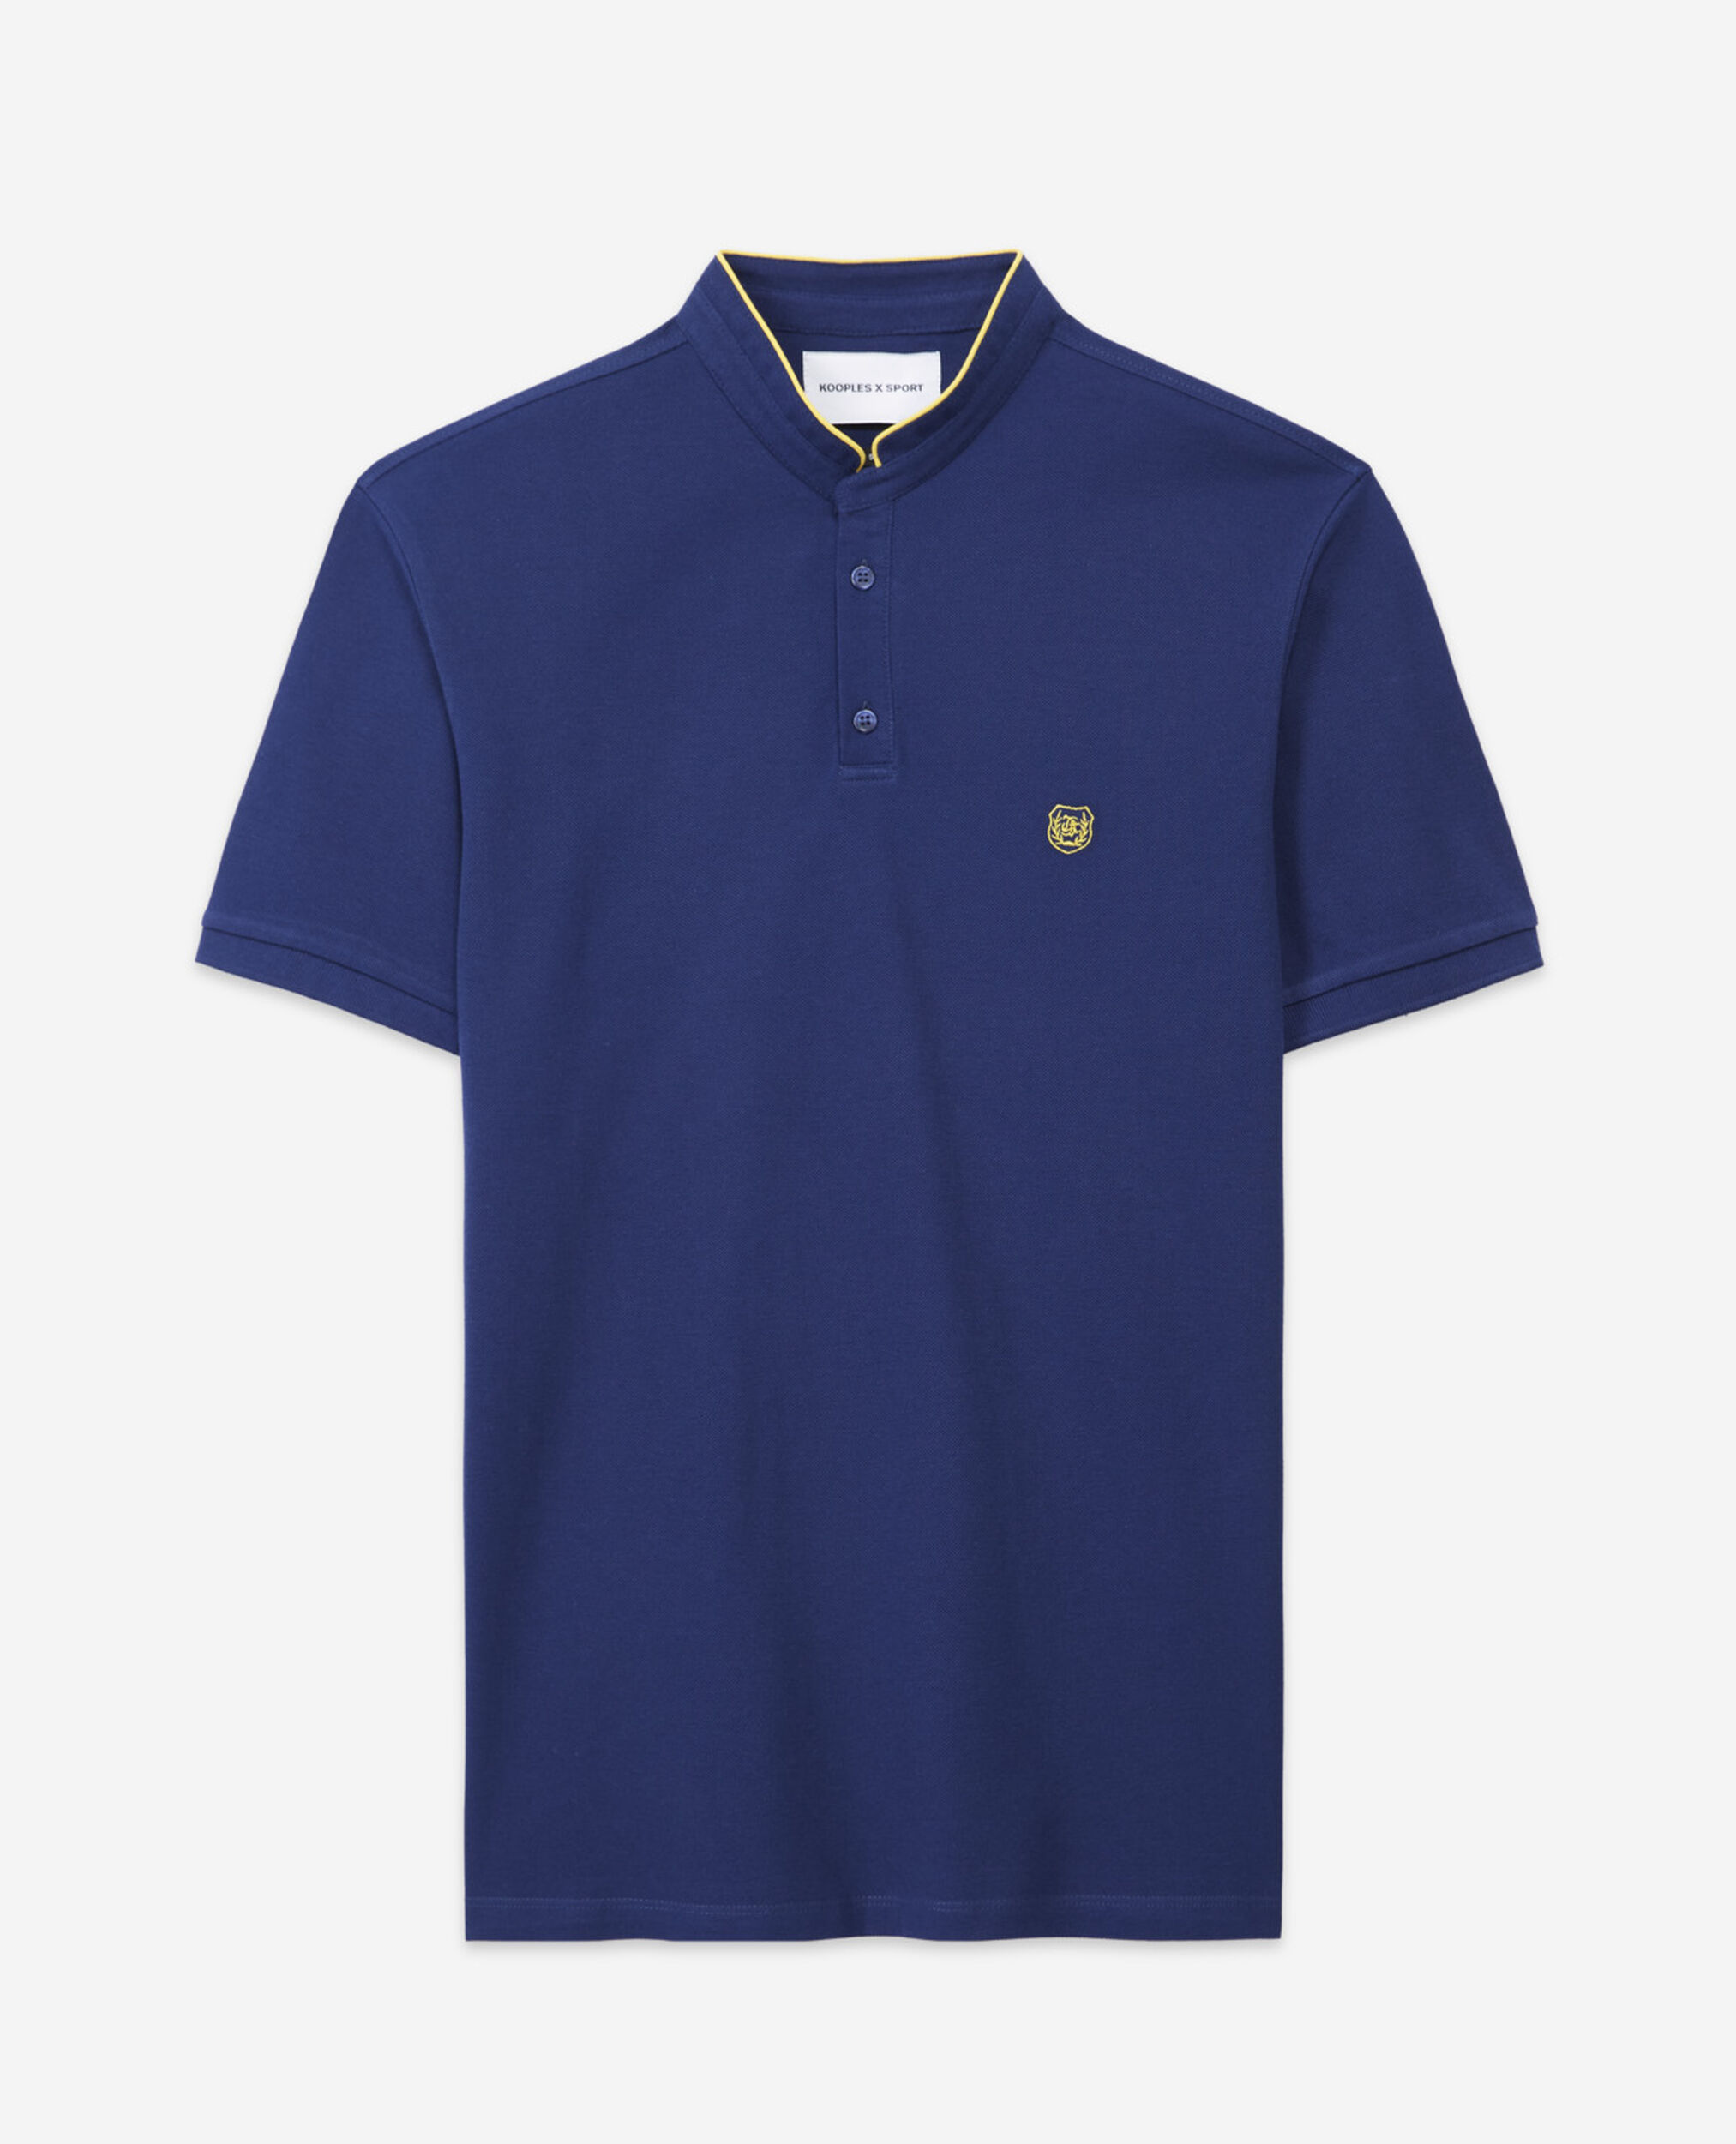 Navy blue jersey polo with yellow details, OFFICER NVY/DANDELION YLW, hi-res image number null